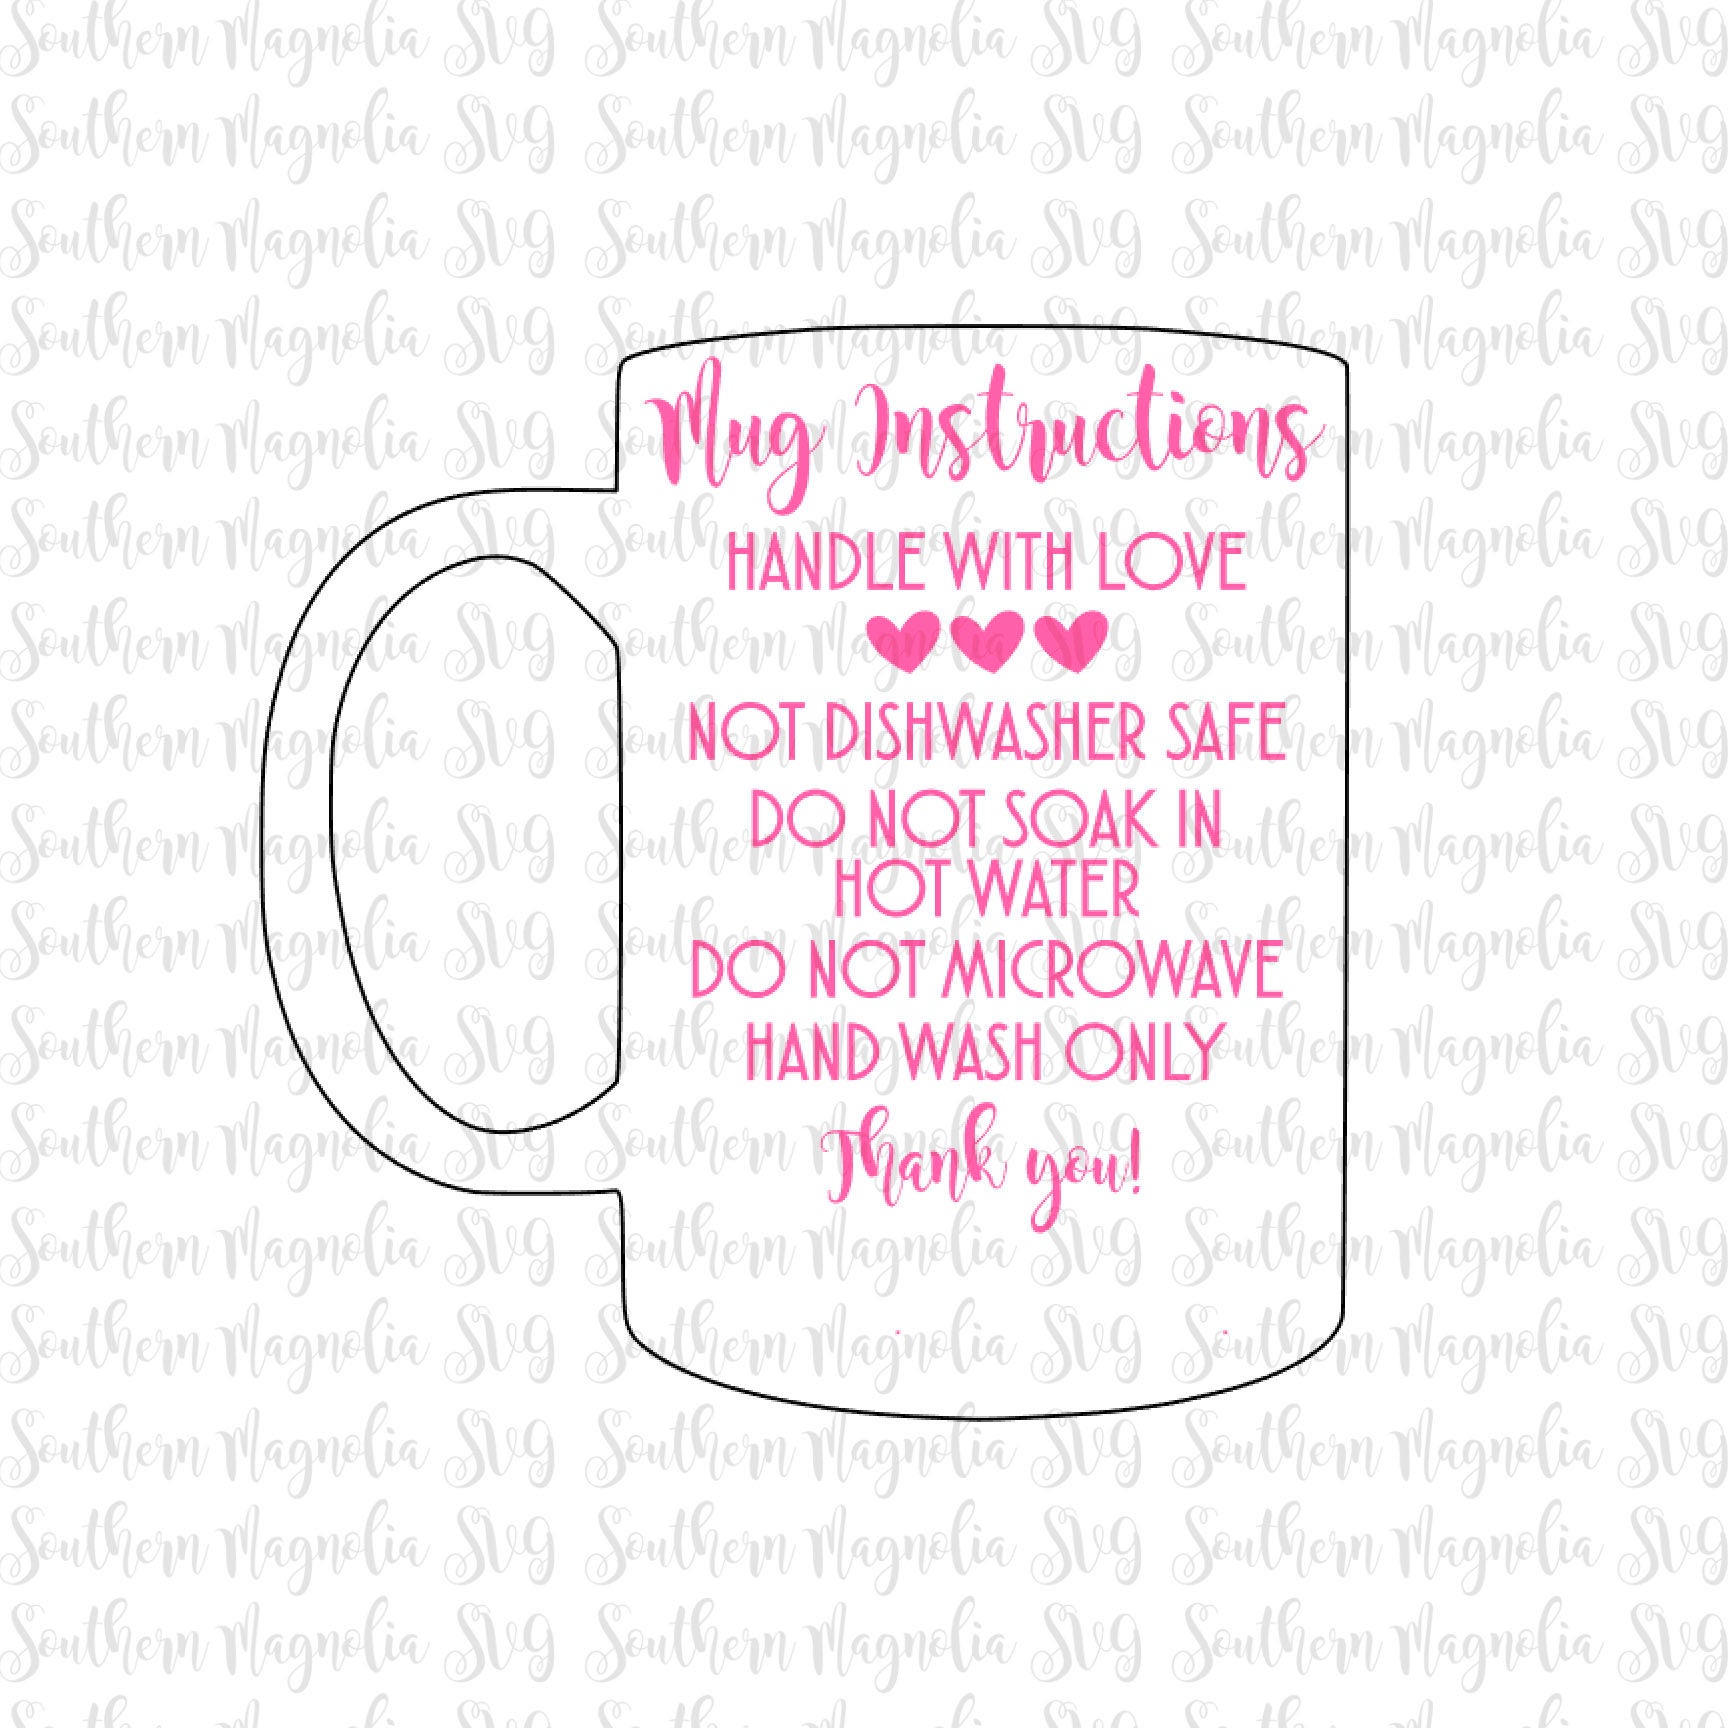 Download Coffee Mug Care Card Instructions Print and Cut File